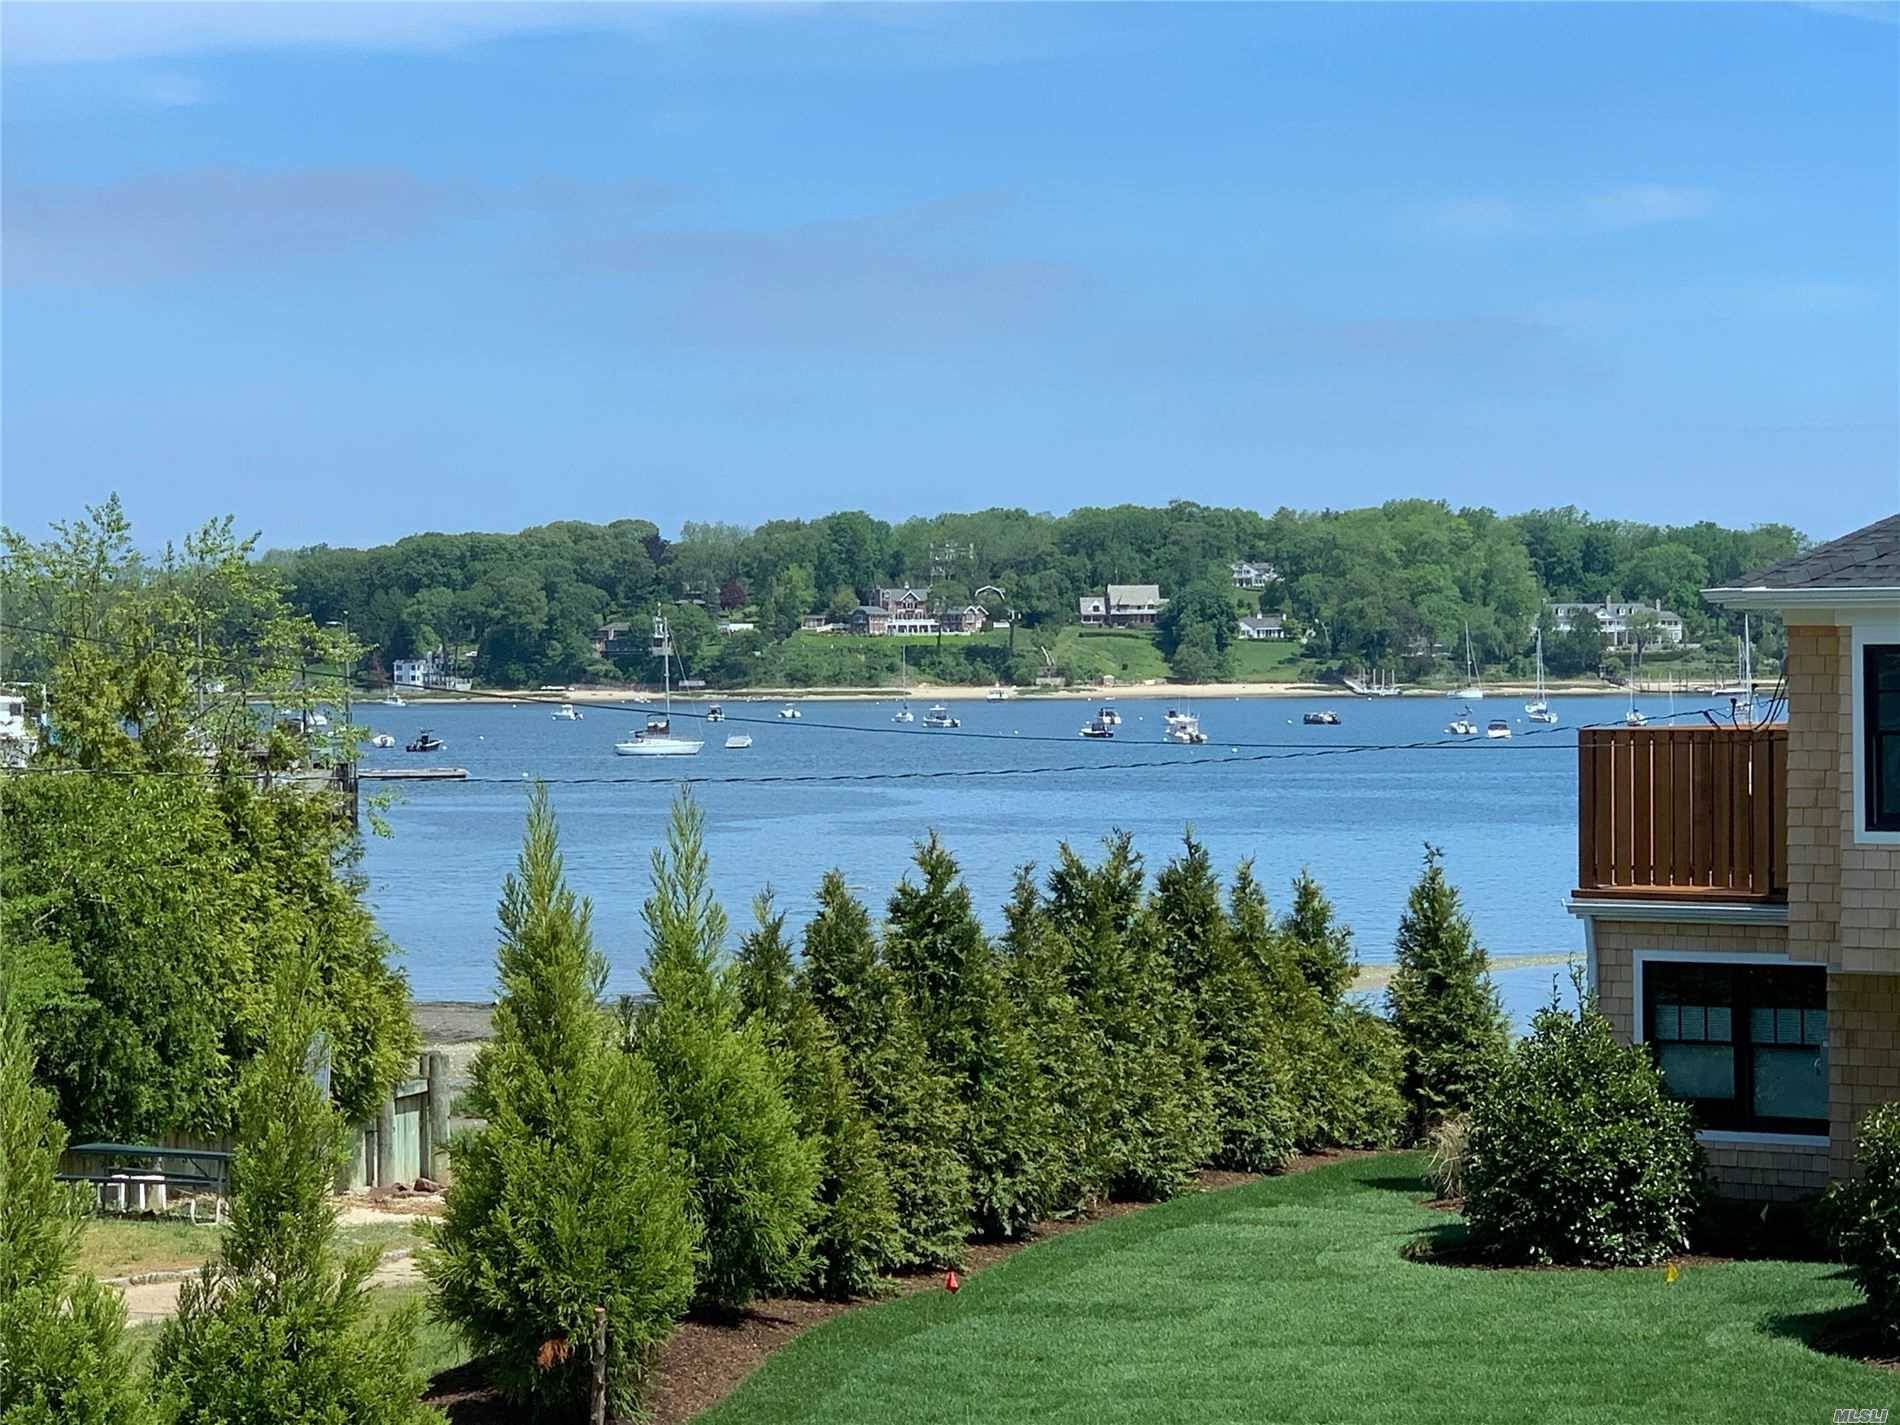 Florence Park, Incredible Water views of Centre Island, Oyster Bay, Cove Neck, LI Sound and steps to beach.